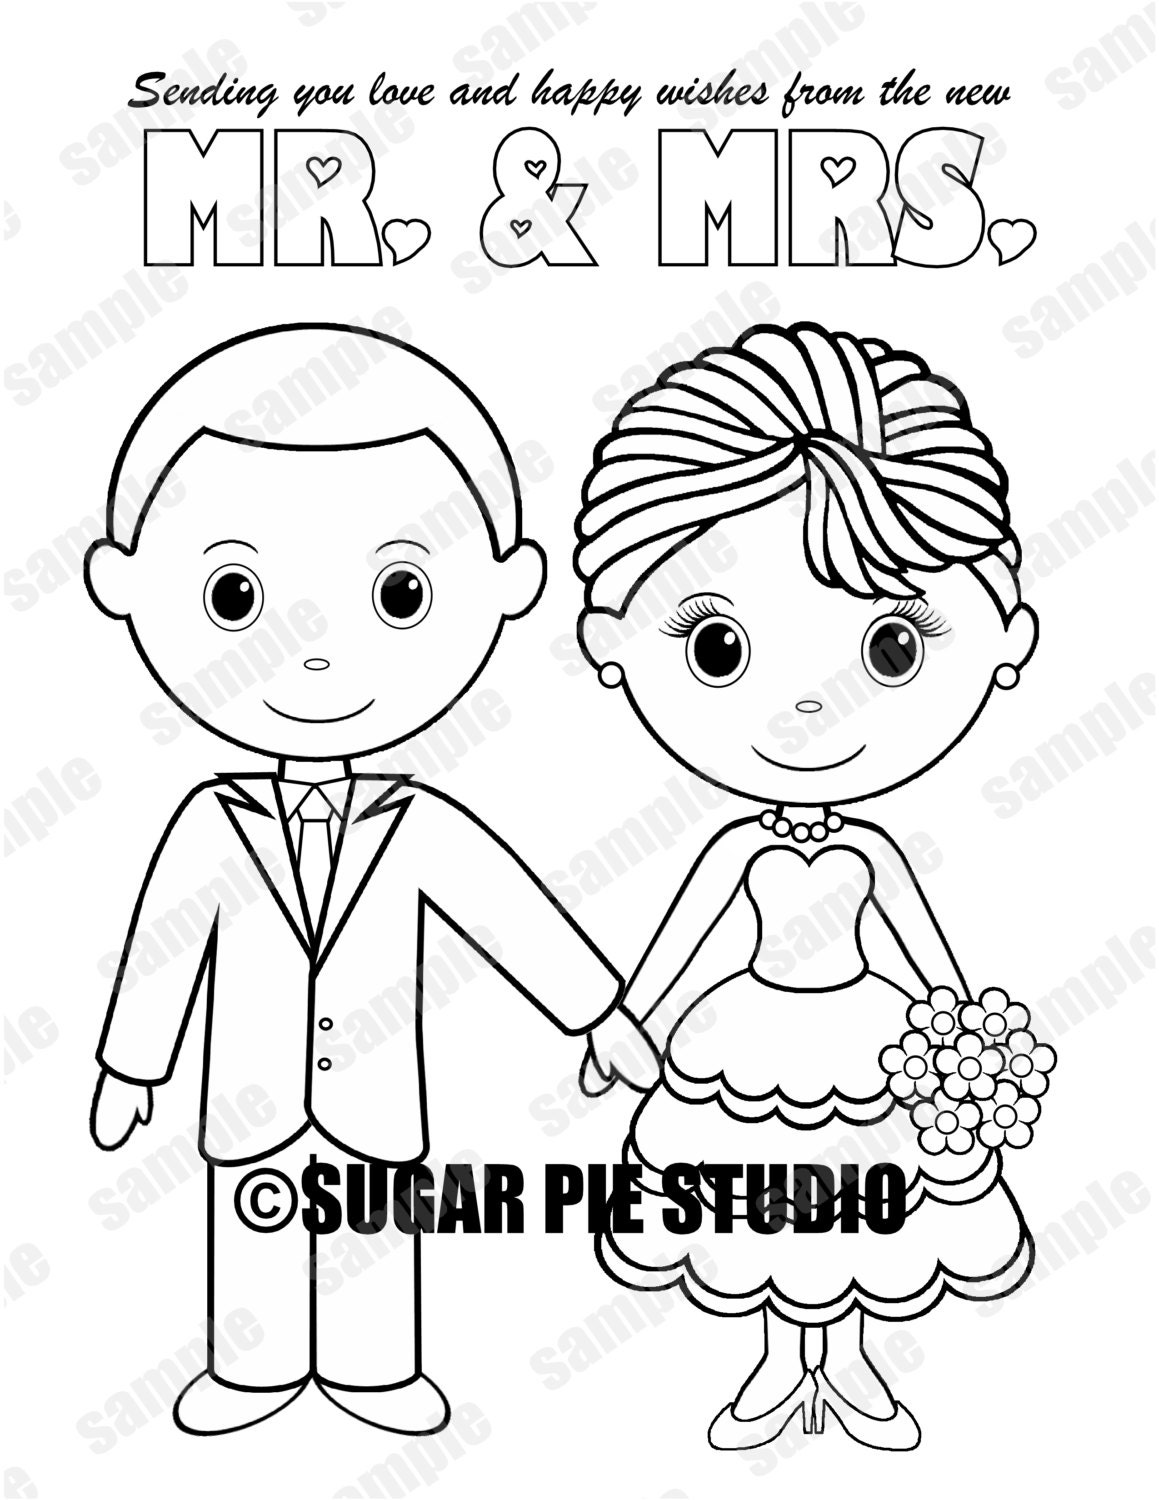 Download INSTANT DOWNLOAD Printable Bride Groom Wedding coloring page activity page Party Favor childrens ...